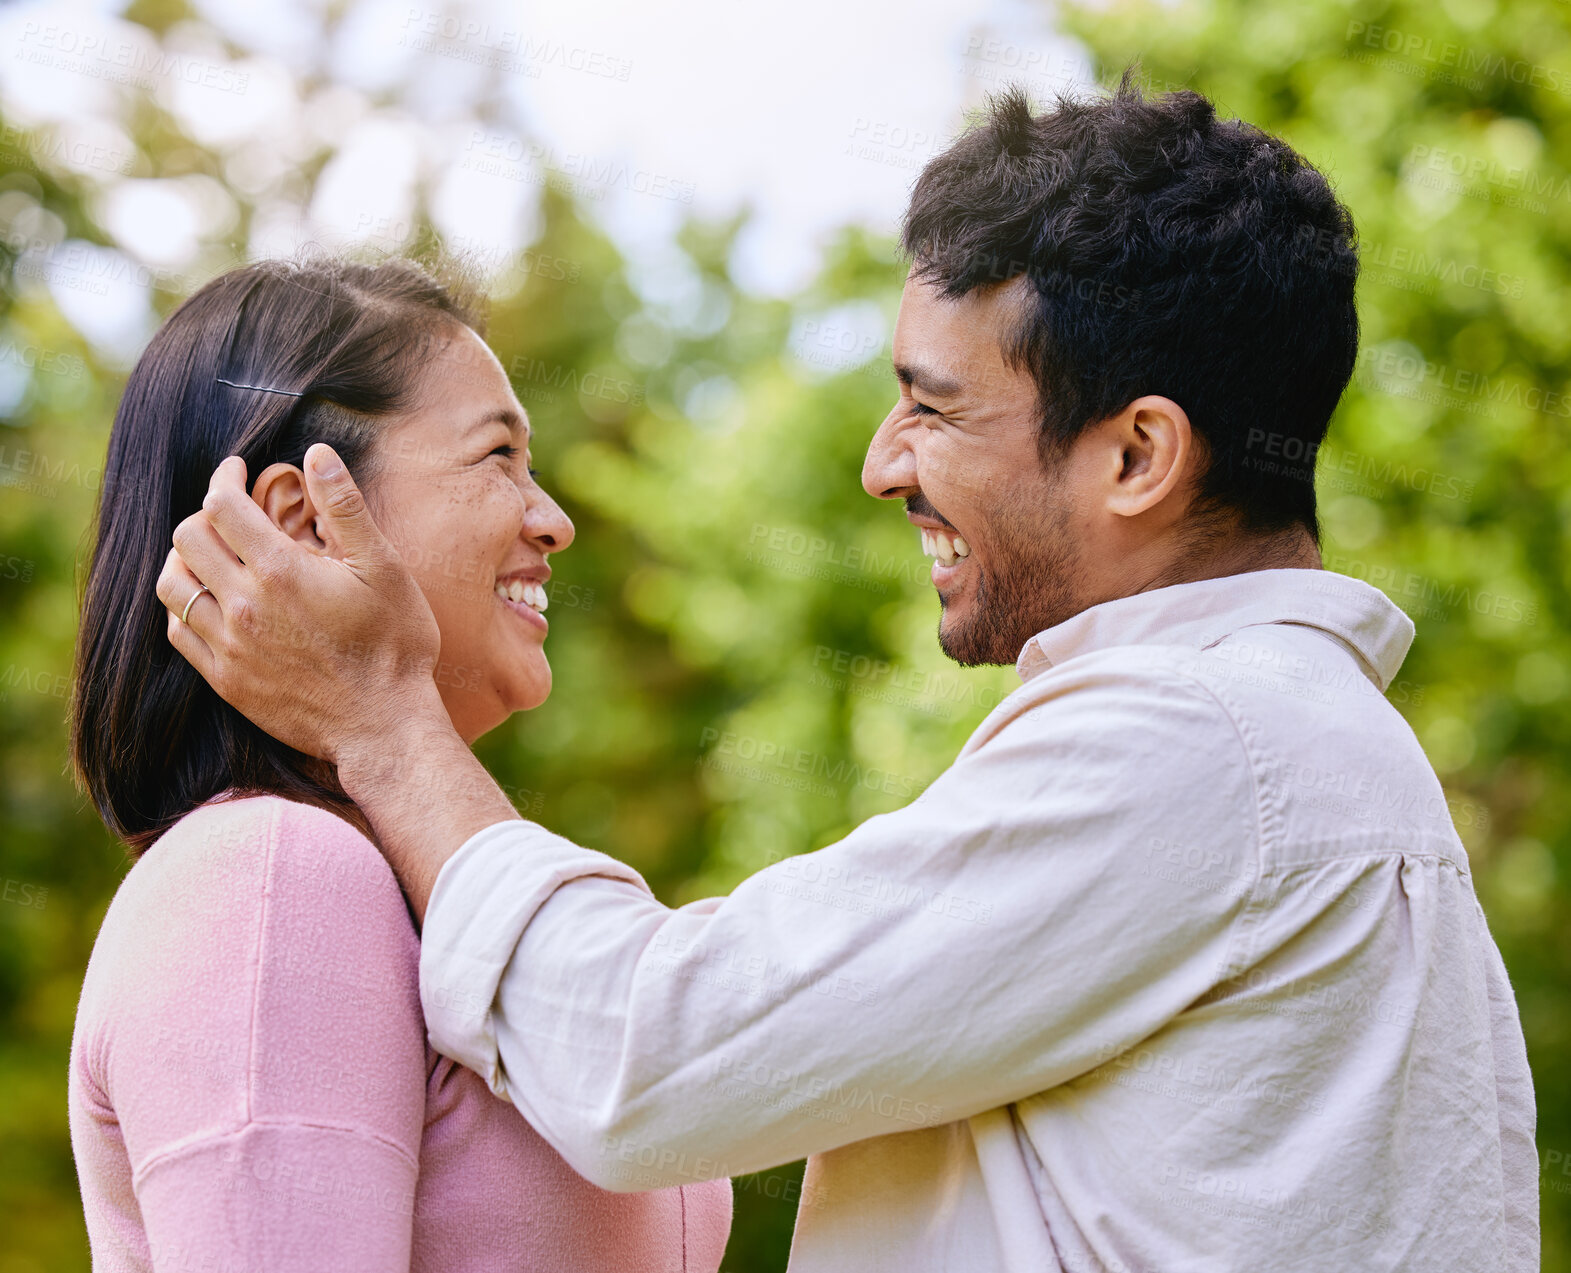 Buy stock photo Loving husband putting hair behind wife's ear standing face to face in a park. Happy romantic moments of lovely couple spending time together outdoors. Man caressing woman's face